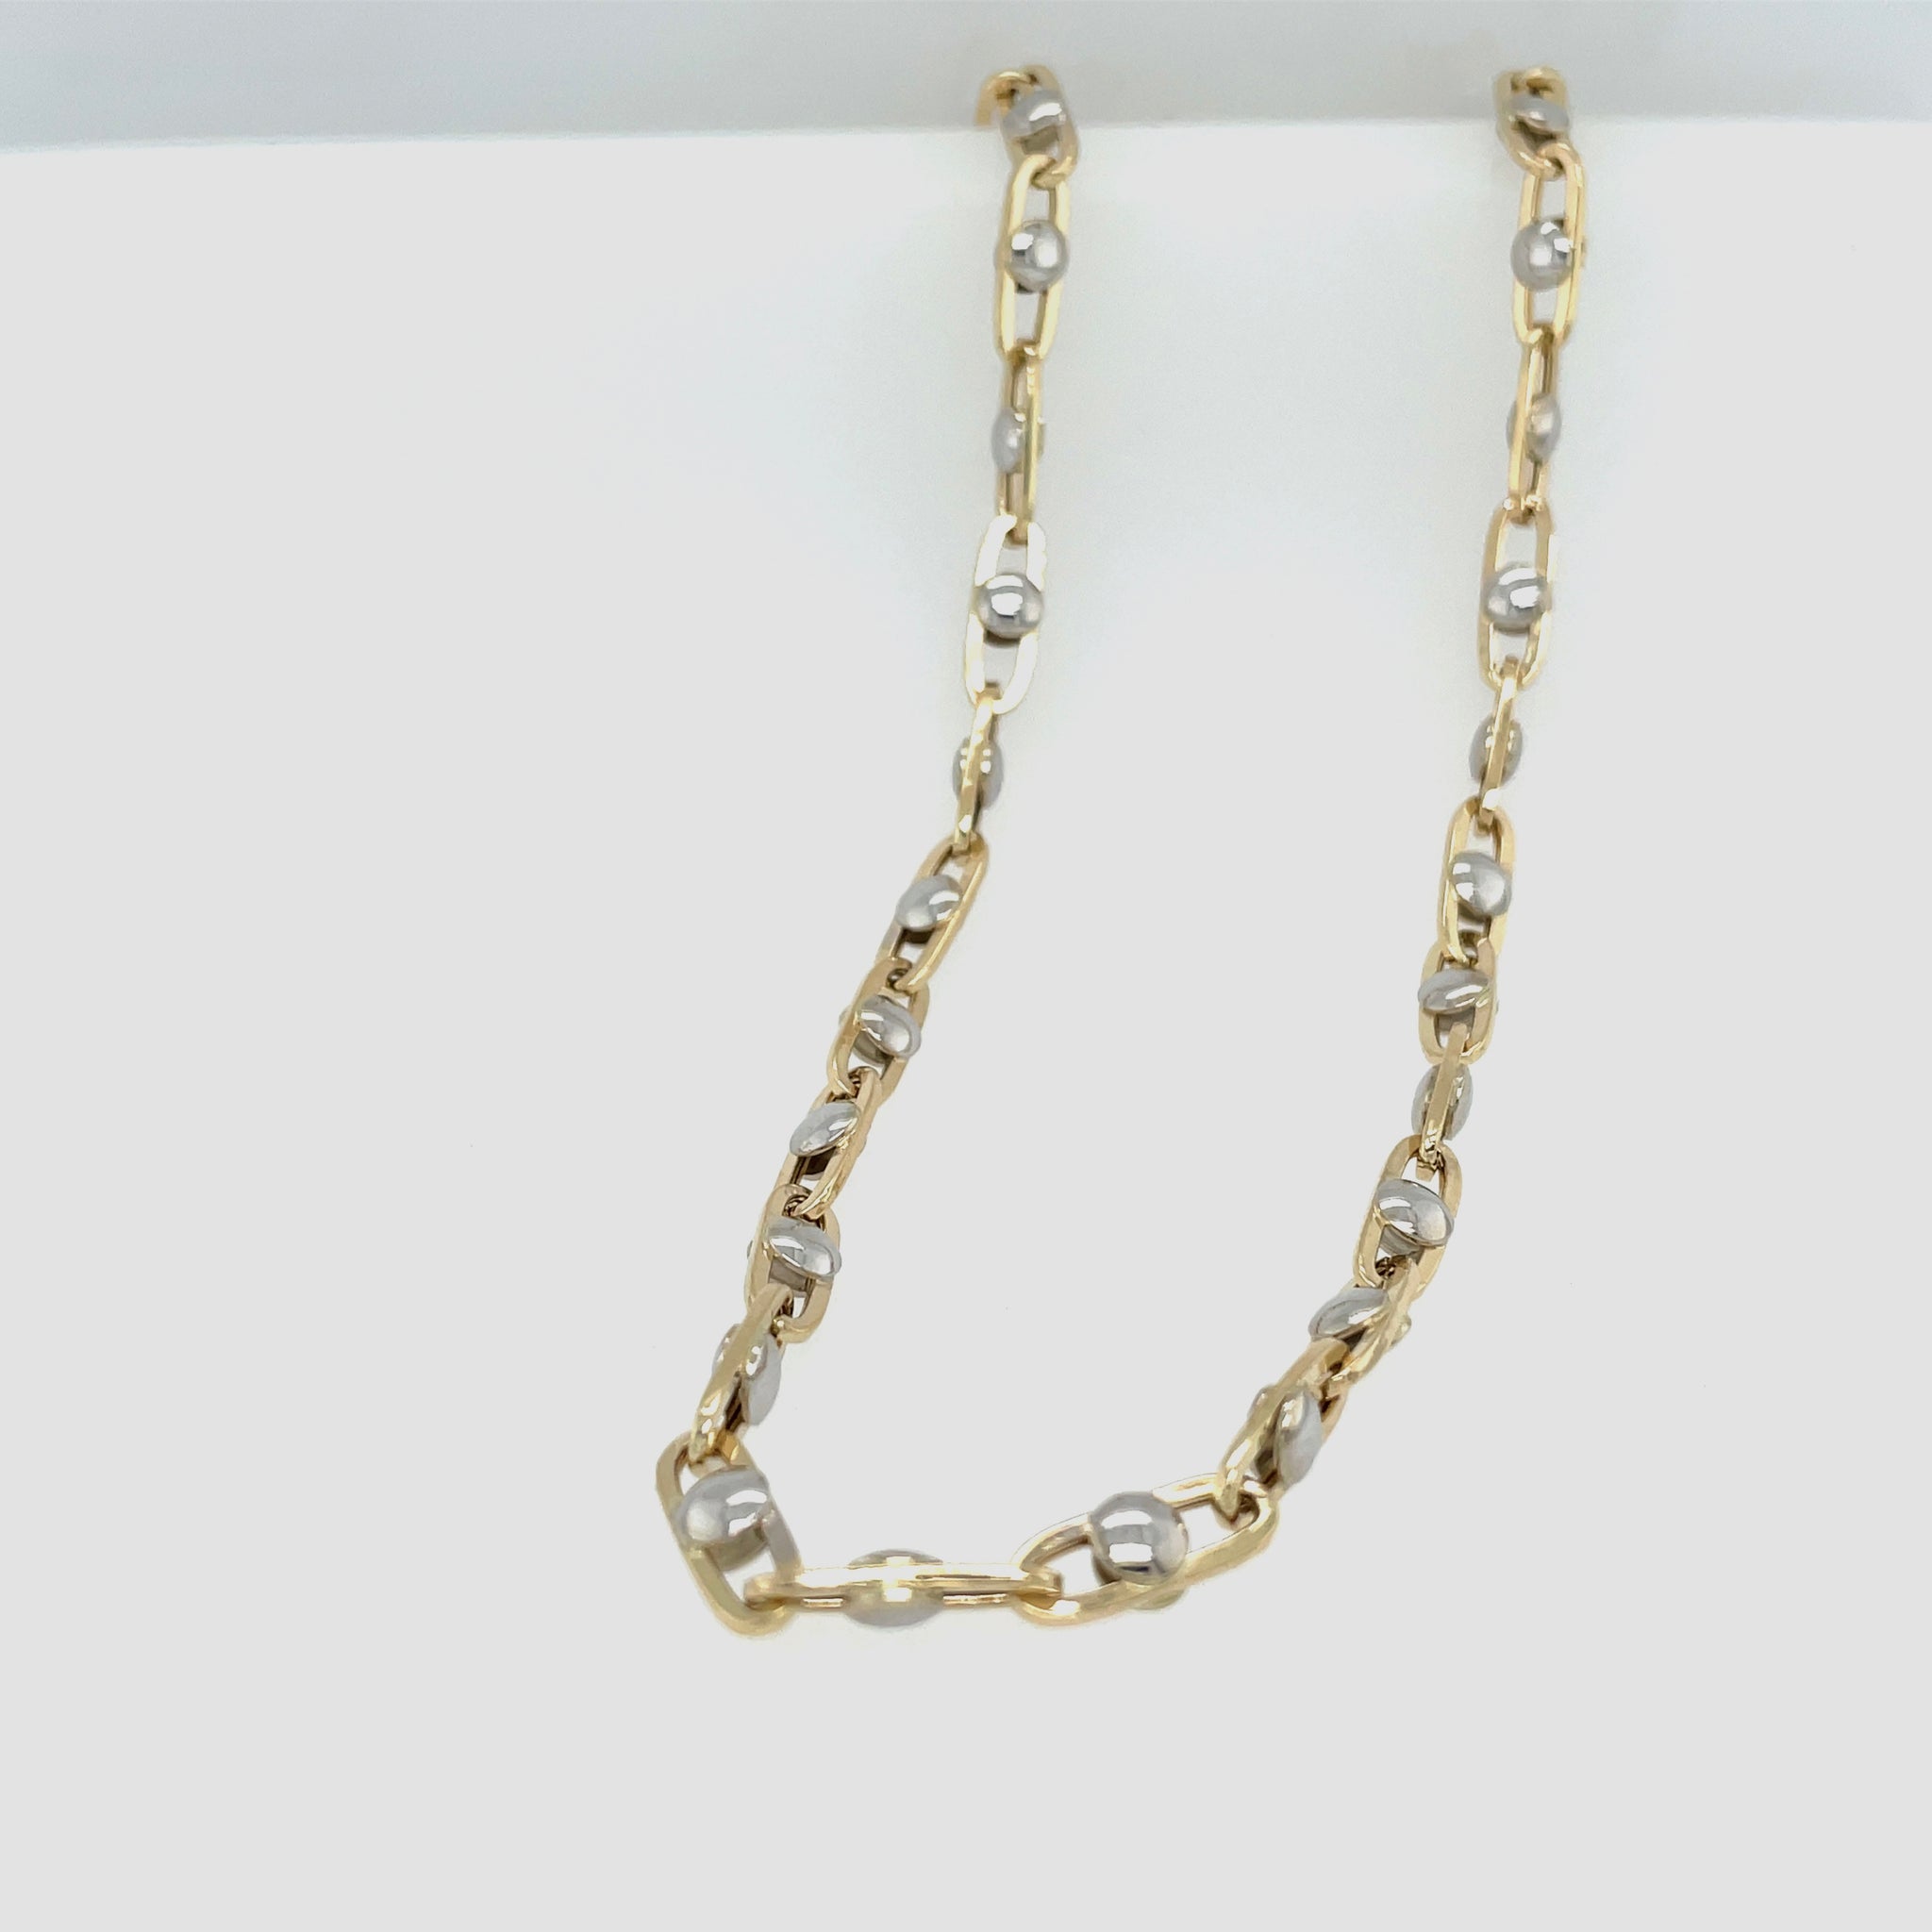 2-Tone Gold Italian Ball and Link Chain